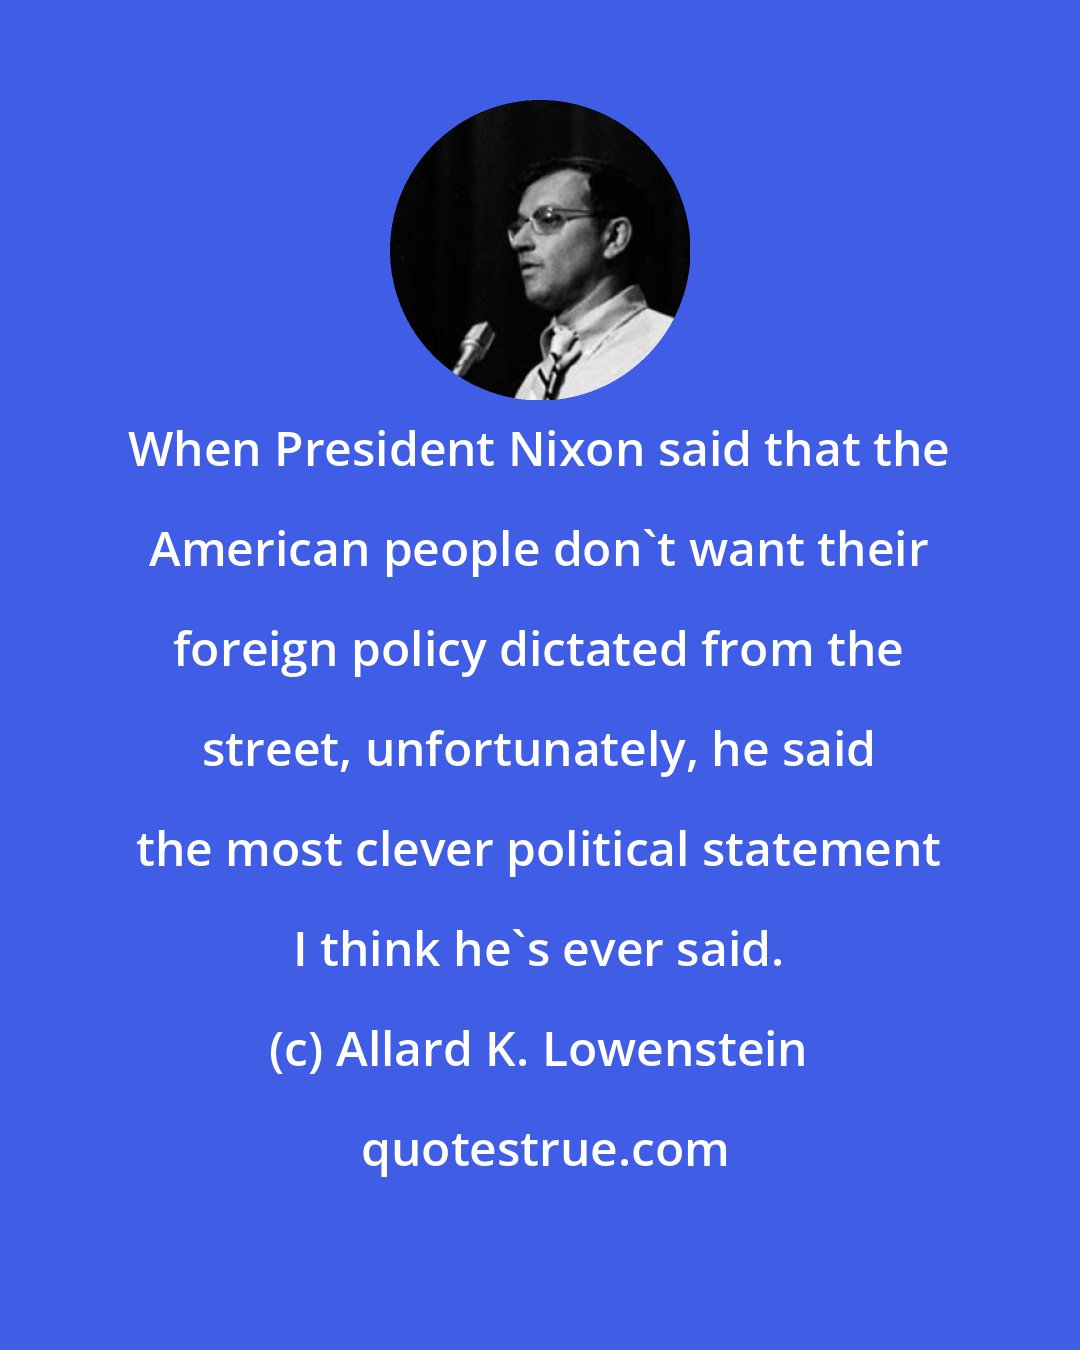 Allard K. Lowenstein: When President Nixon said that the American people don't want their foreign policy dictated from the street, unfortunately, he said the most clever political statement I think he's ever said.